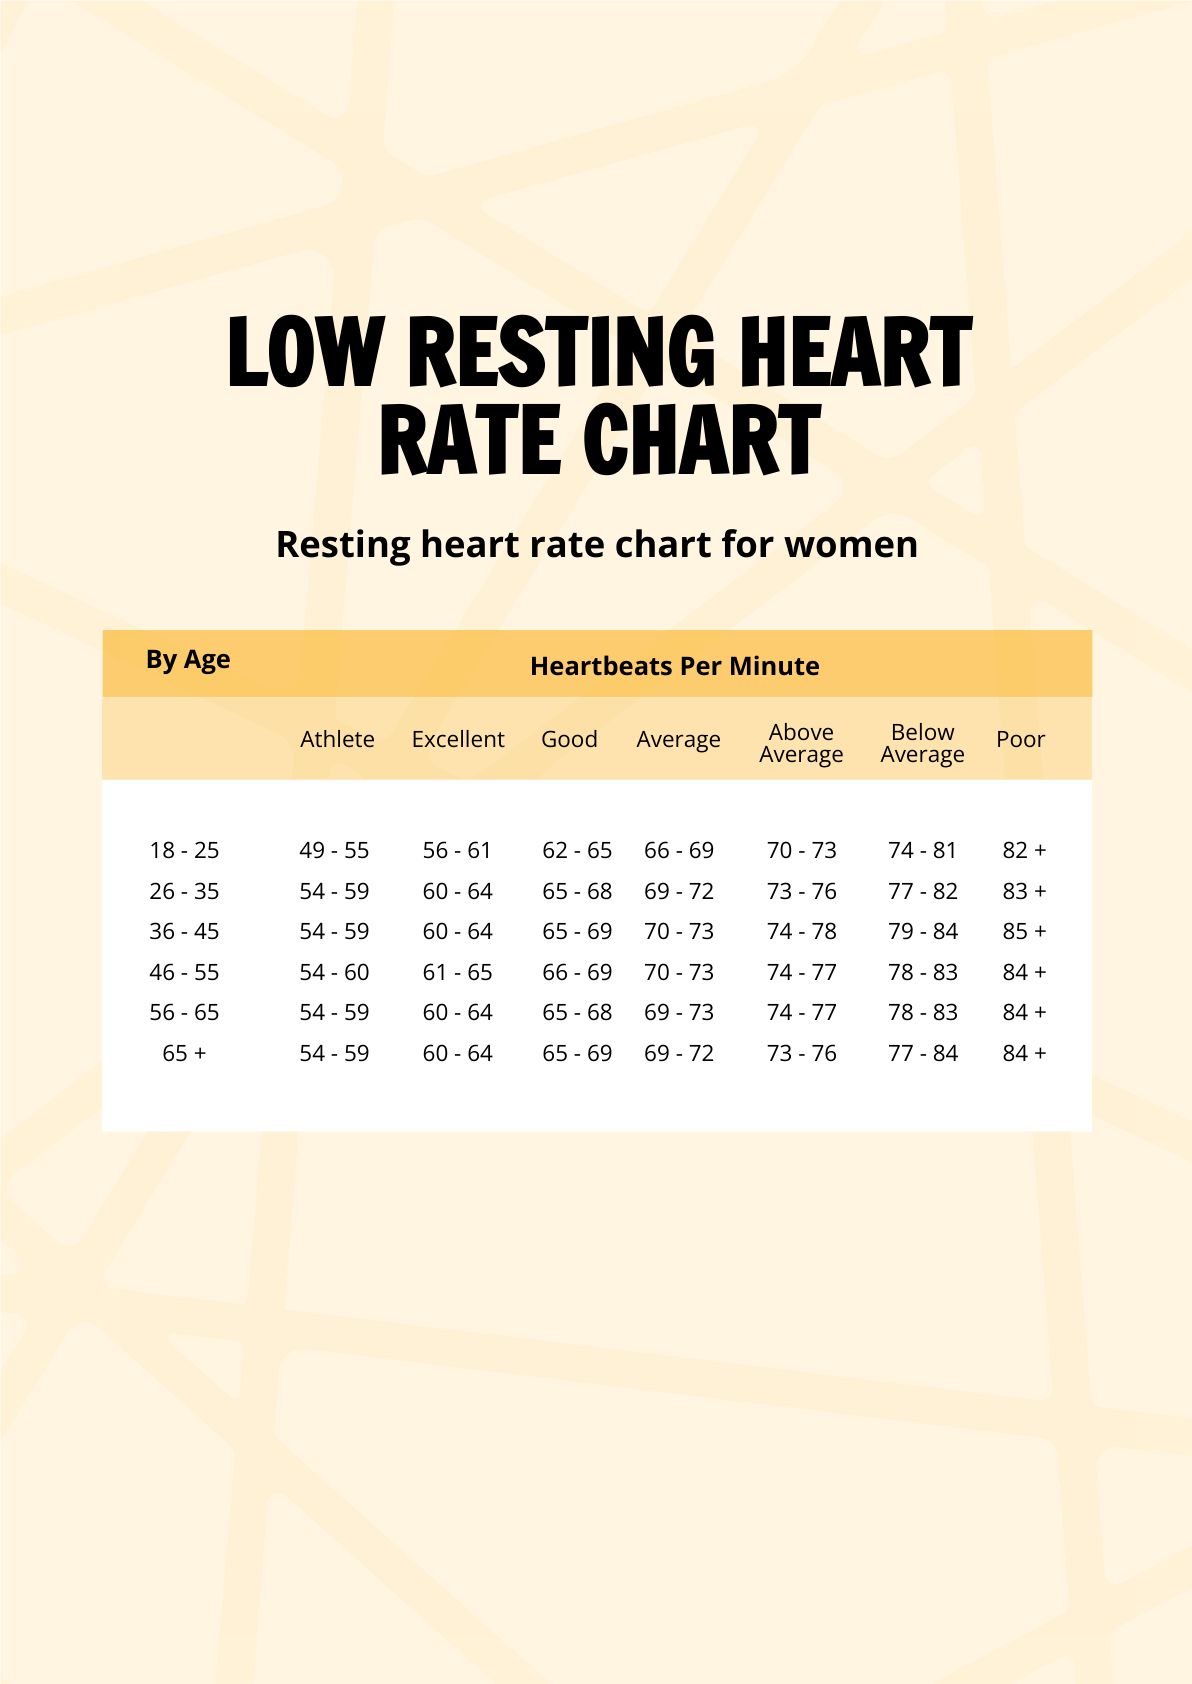 Low Resting Heart Rate Chart in PDF